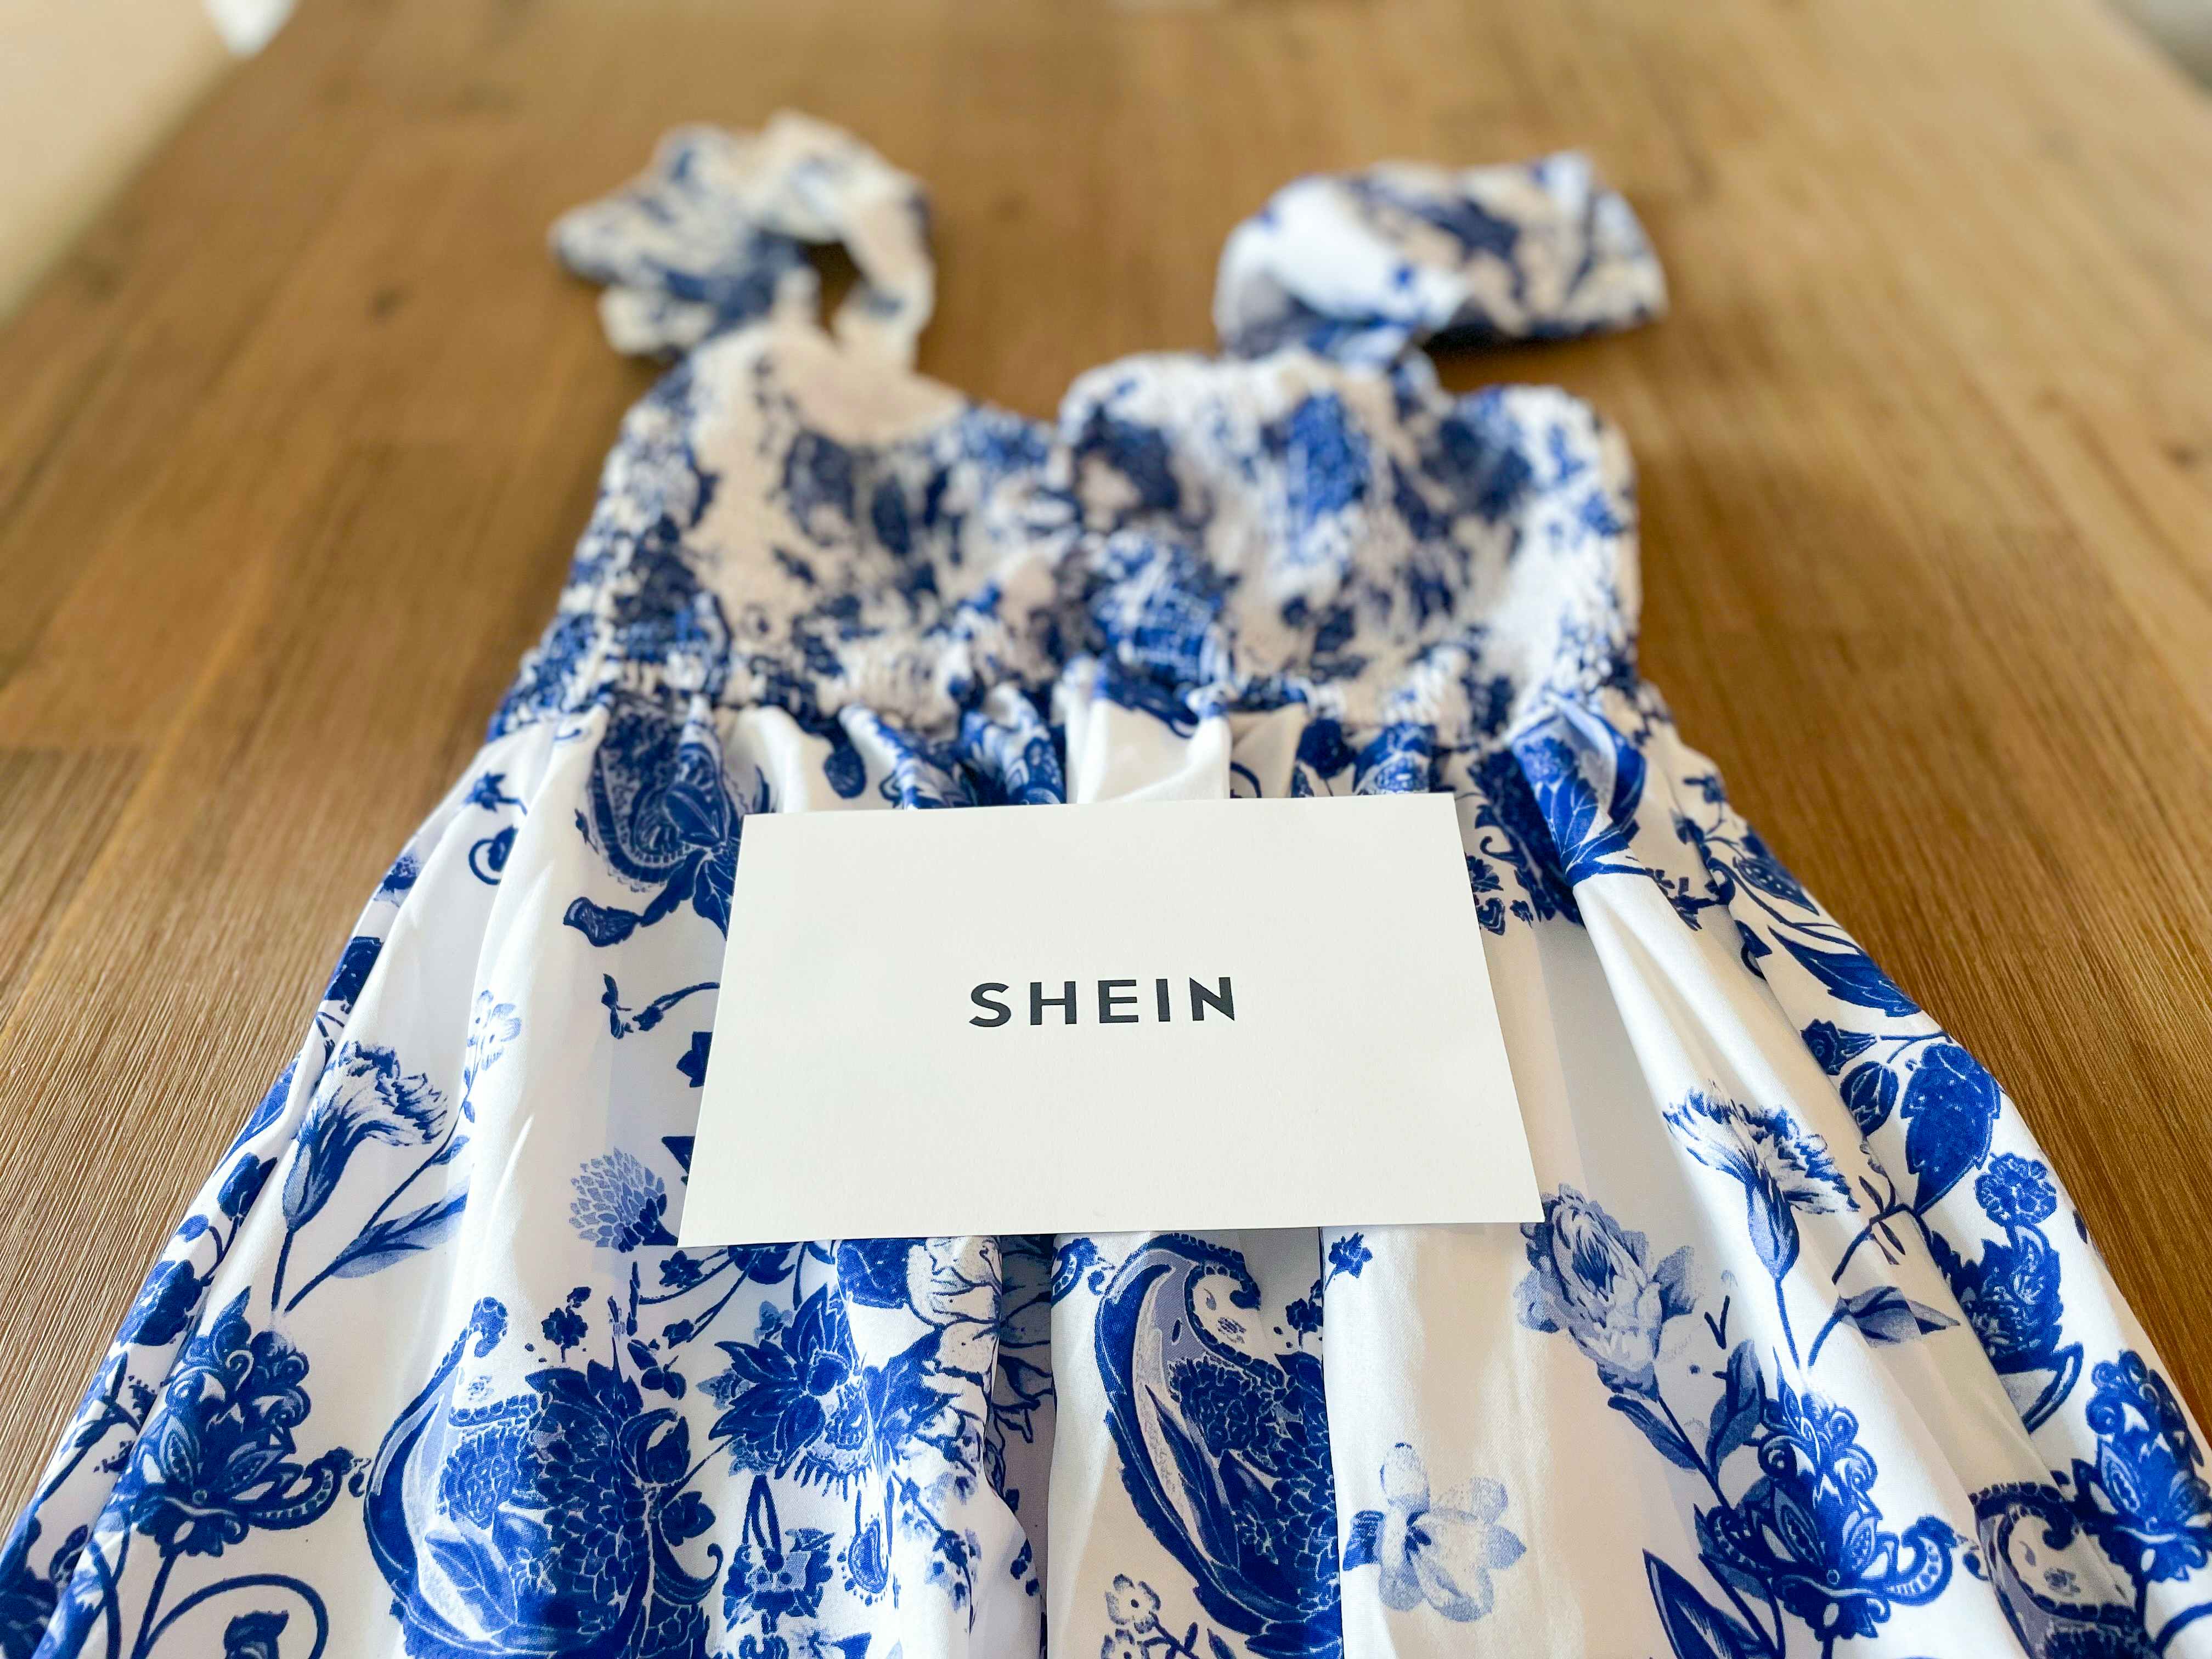 Is SheIn Legit? Here's Why It's Worth Shopping - The Krazy Coupon Lady